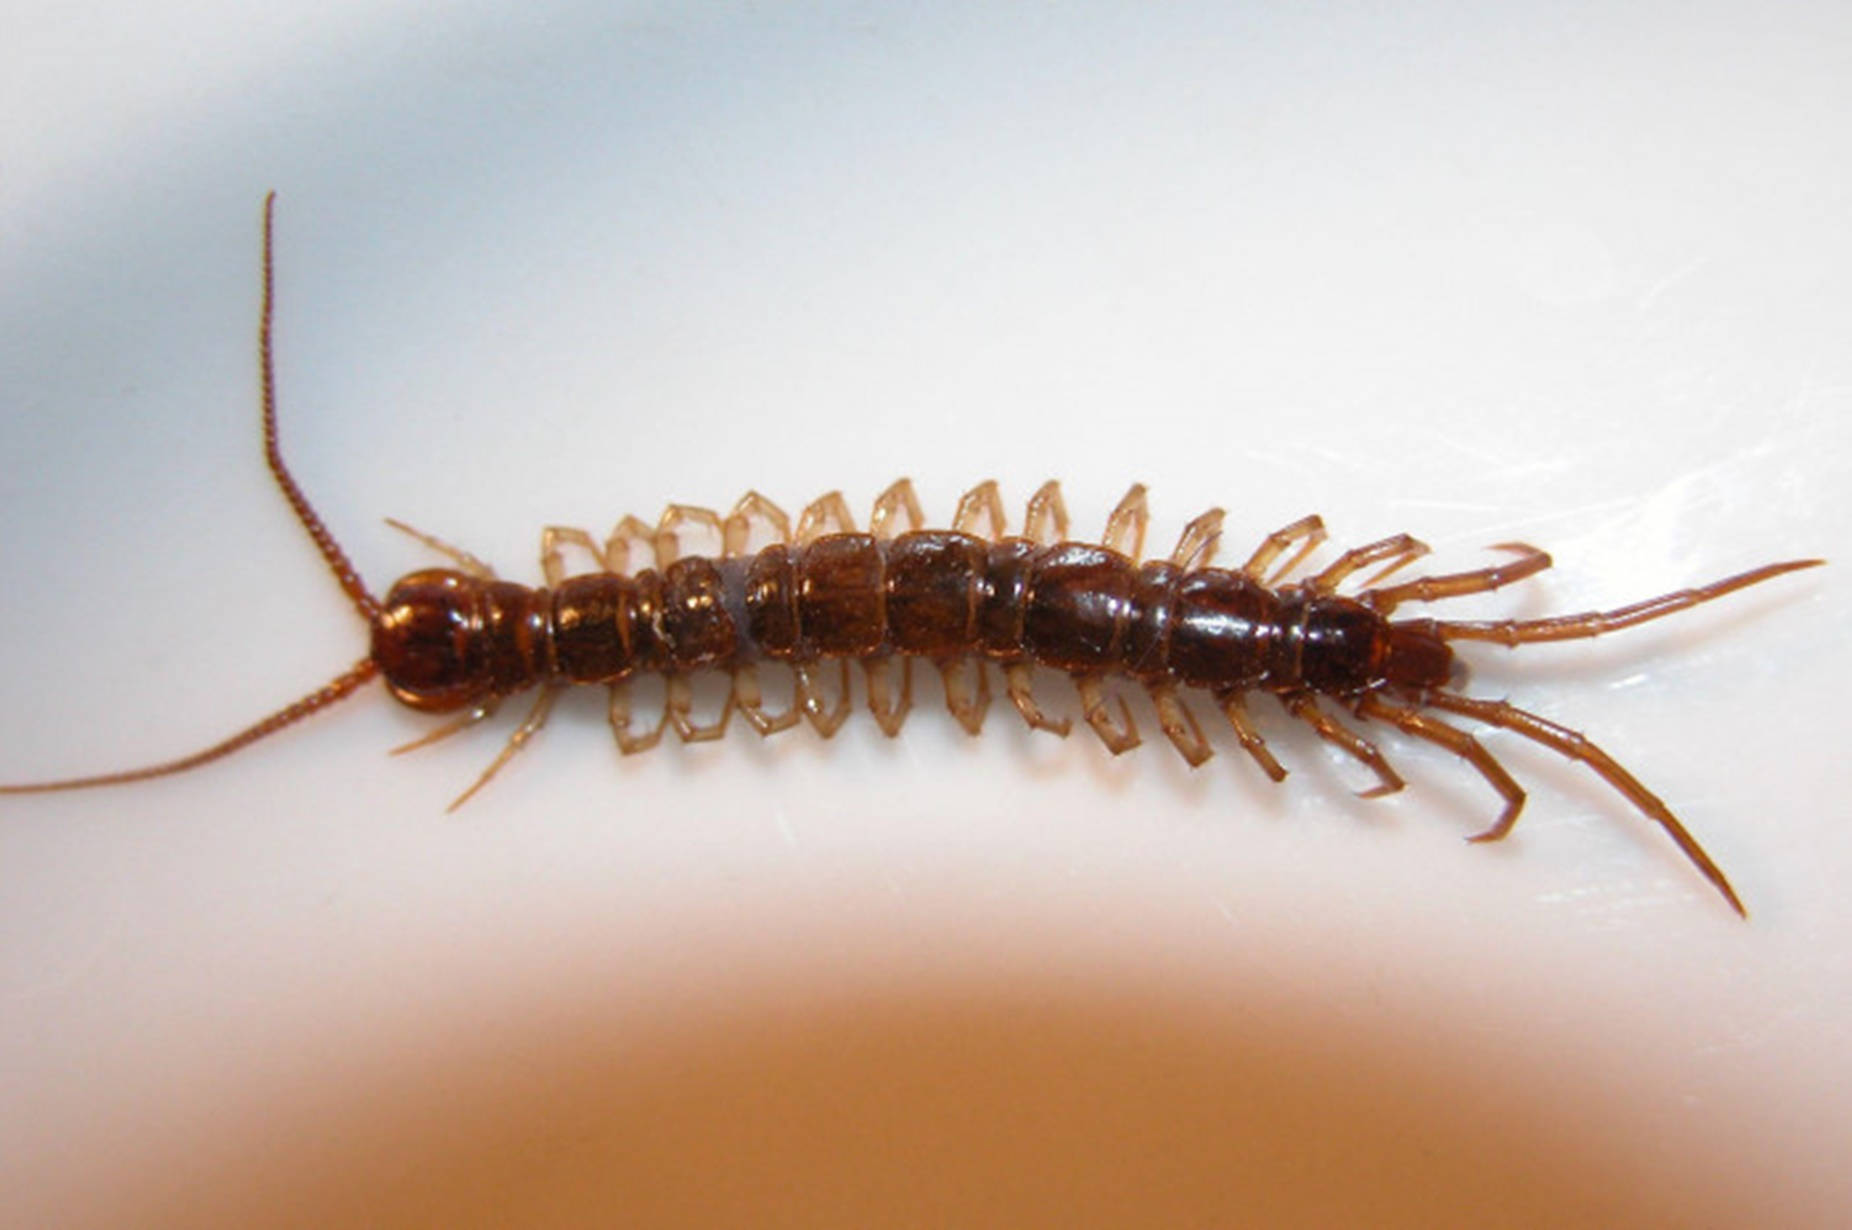 Captivating Close-up of a Brown Centipede Wallpaper